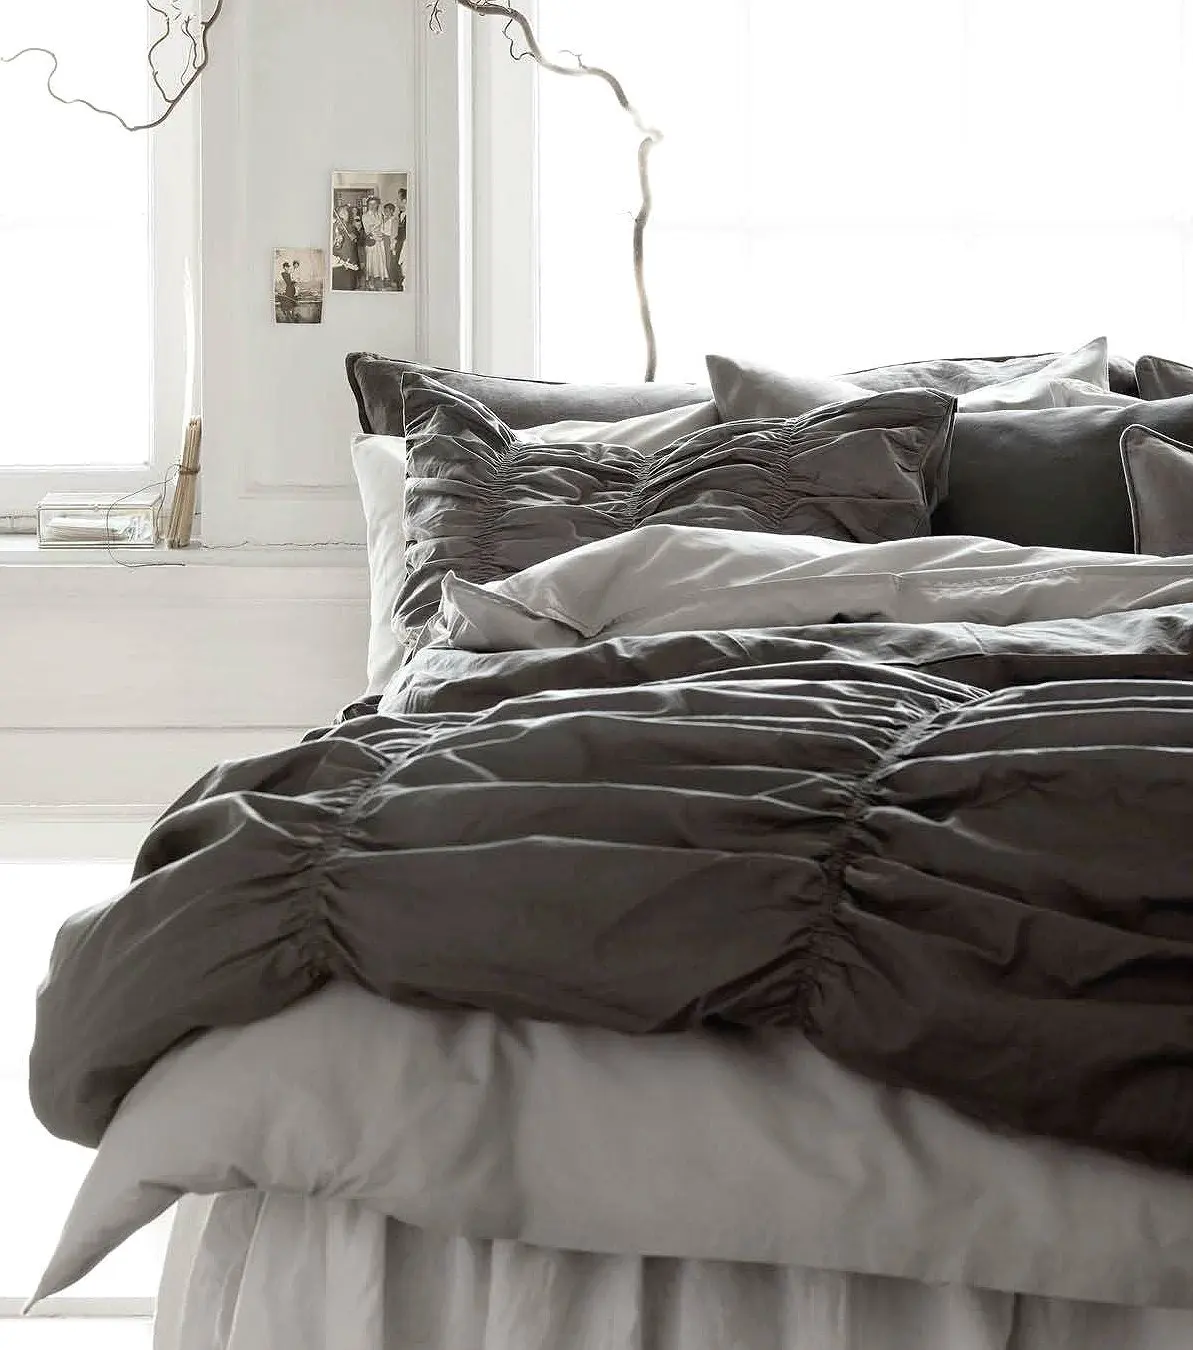 Buy Shabby Chic Smocked Ruched Cotton Duvet Cover Dark Gray Smock Pleated Bedding 2pc Set Modern Slate Grey French Country Style Twin Single In Cheap Price On Alibaba Com